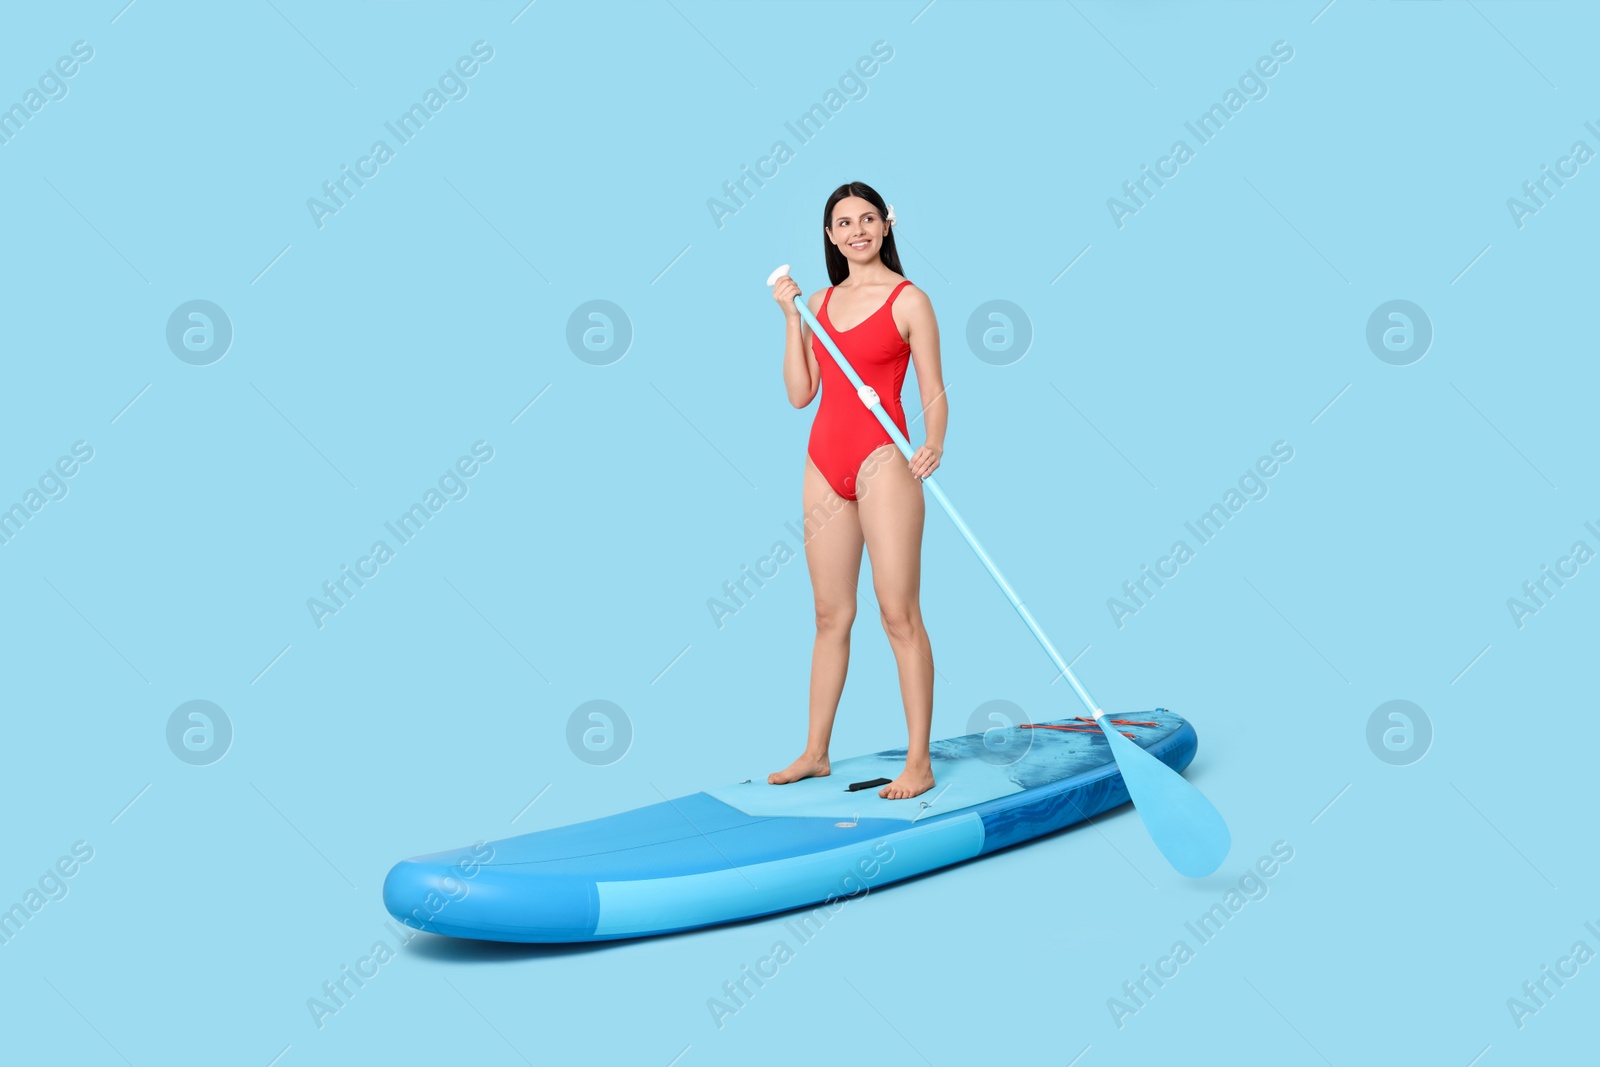 Photo of Happy woman with paddle on SUP board against light blue background, space for text